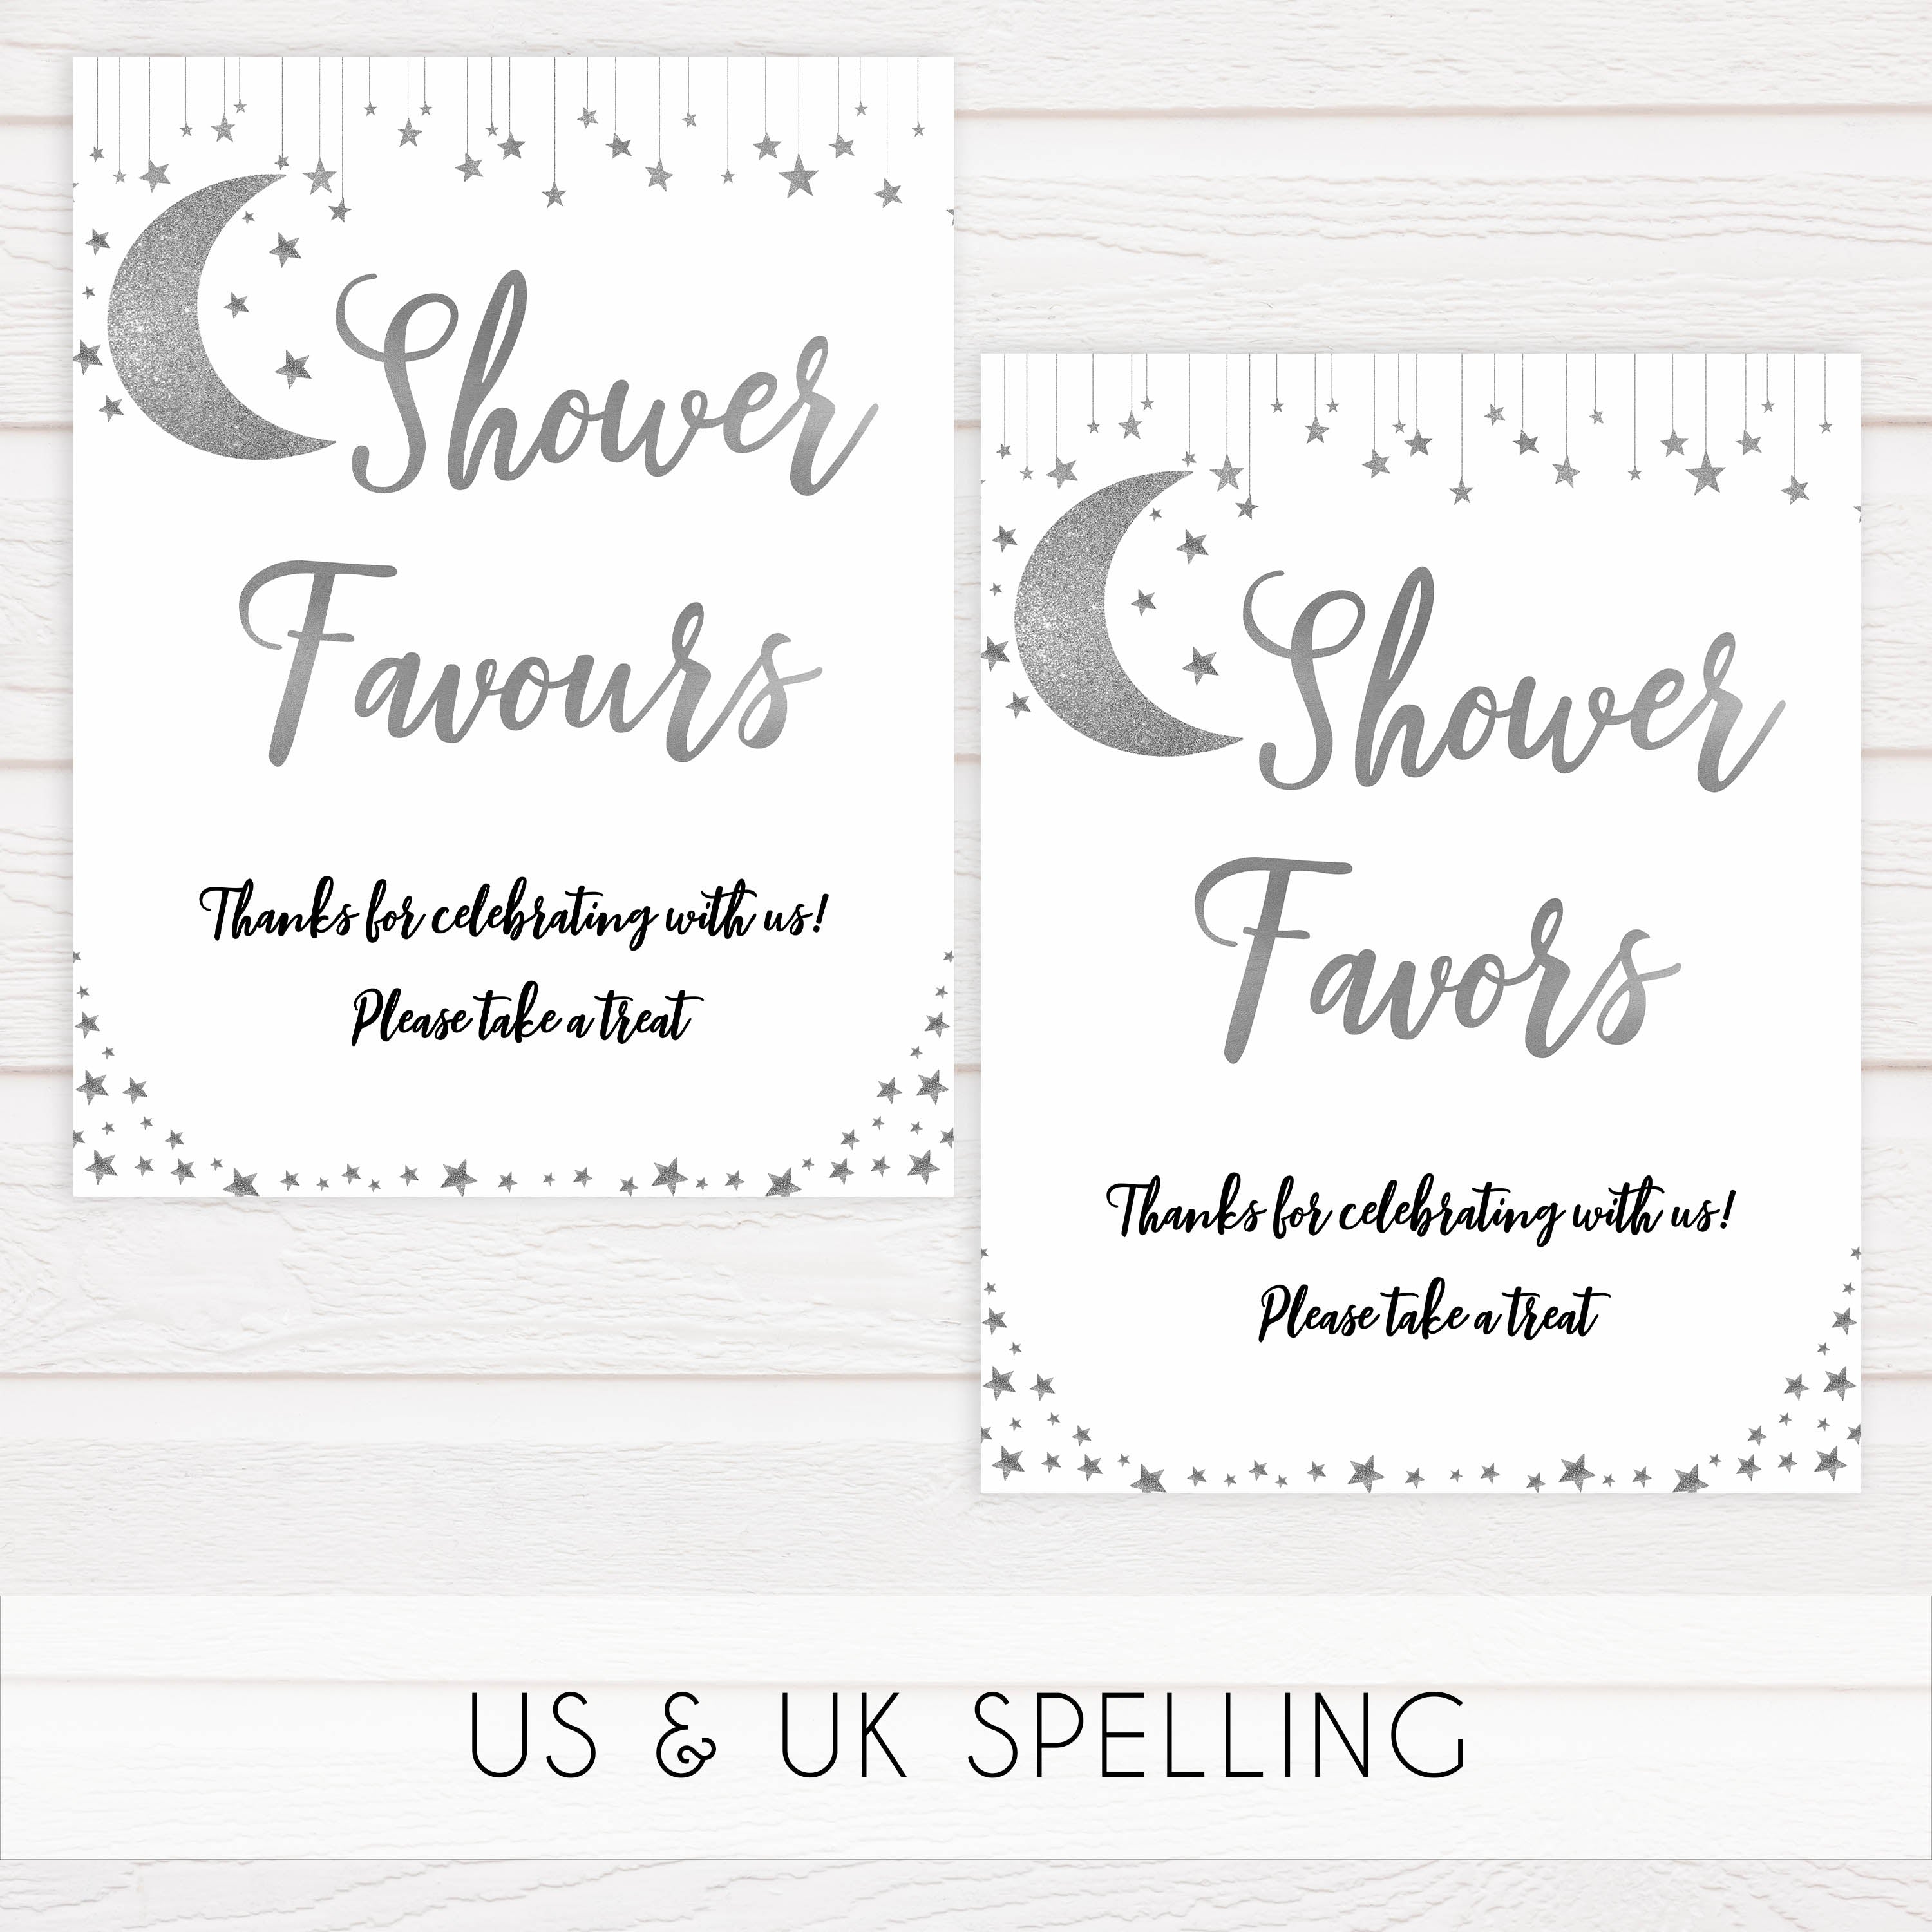 Shower Favors Sign, Little star baby signs, printable baby signs, printable baby decor, twinkle baby shower, star baby decor, fun baby shower ideas, top baby shower themes